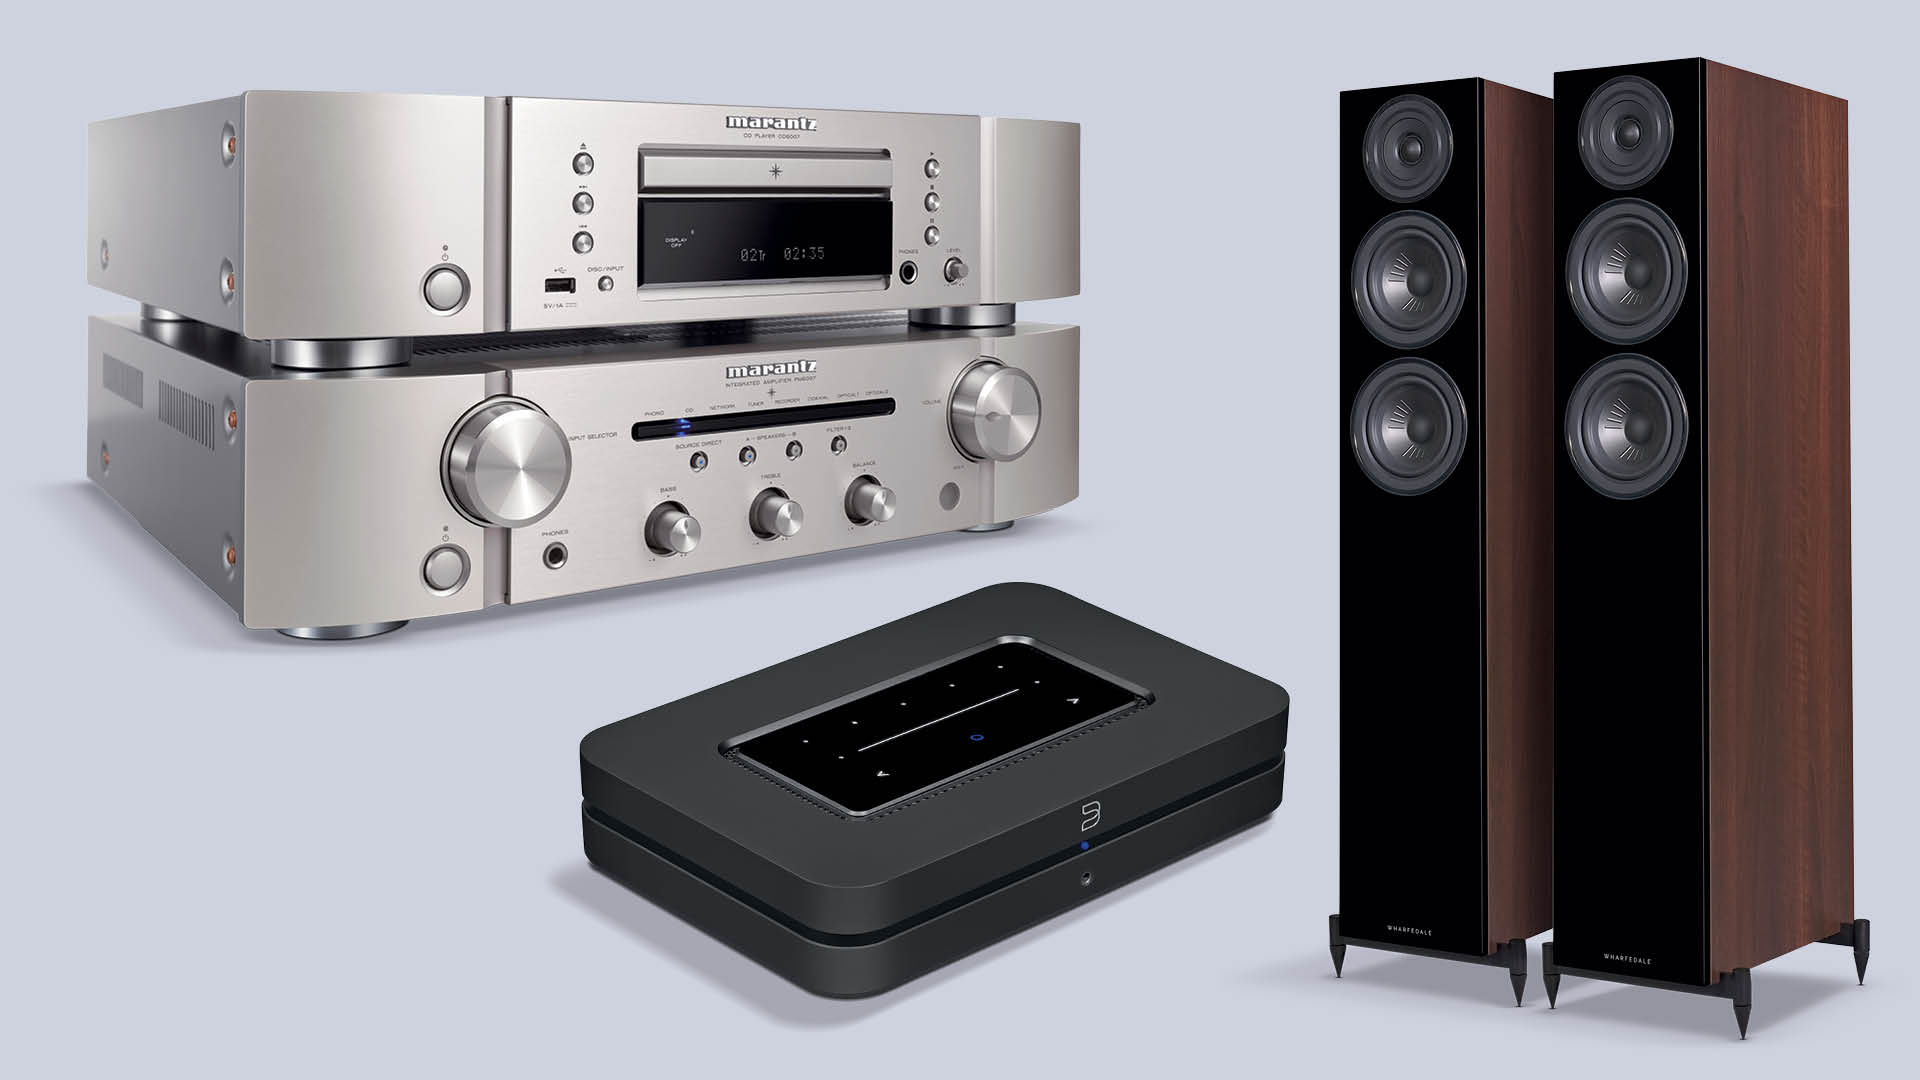 Introducing the Marantz PM6007 with Digital Connectivity 